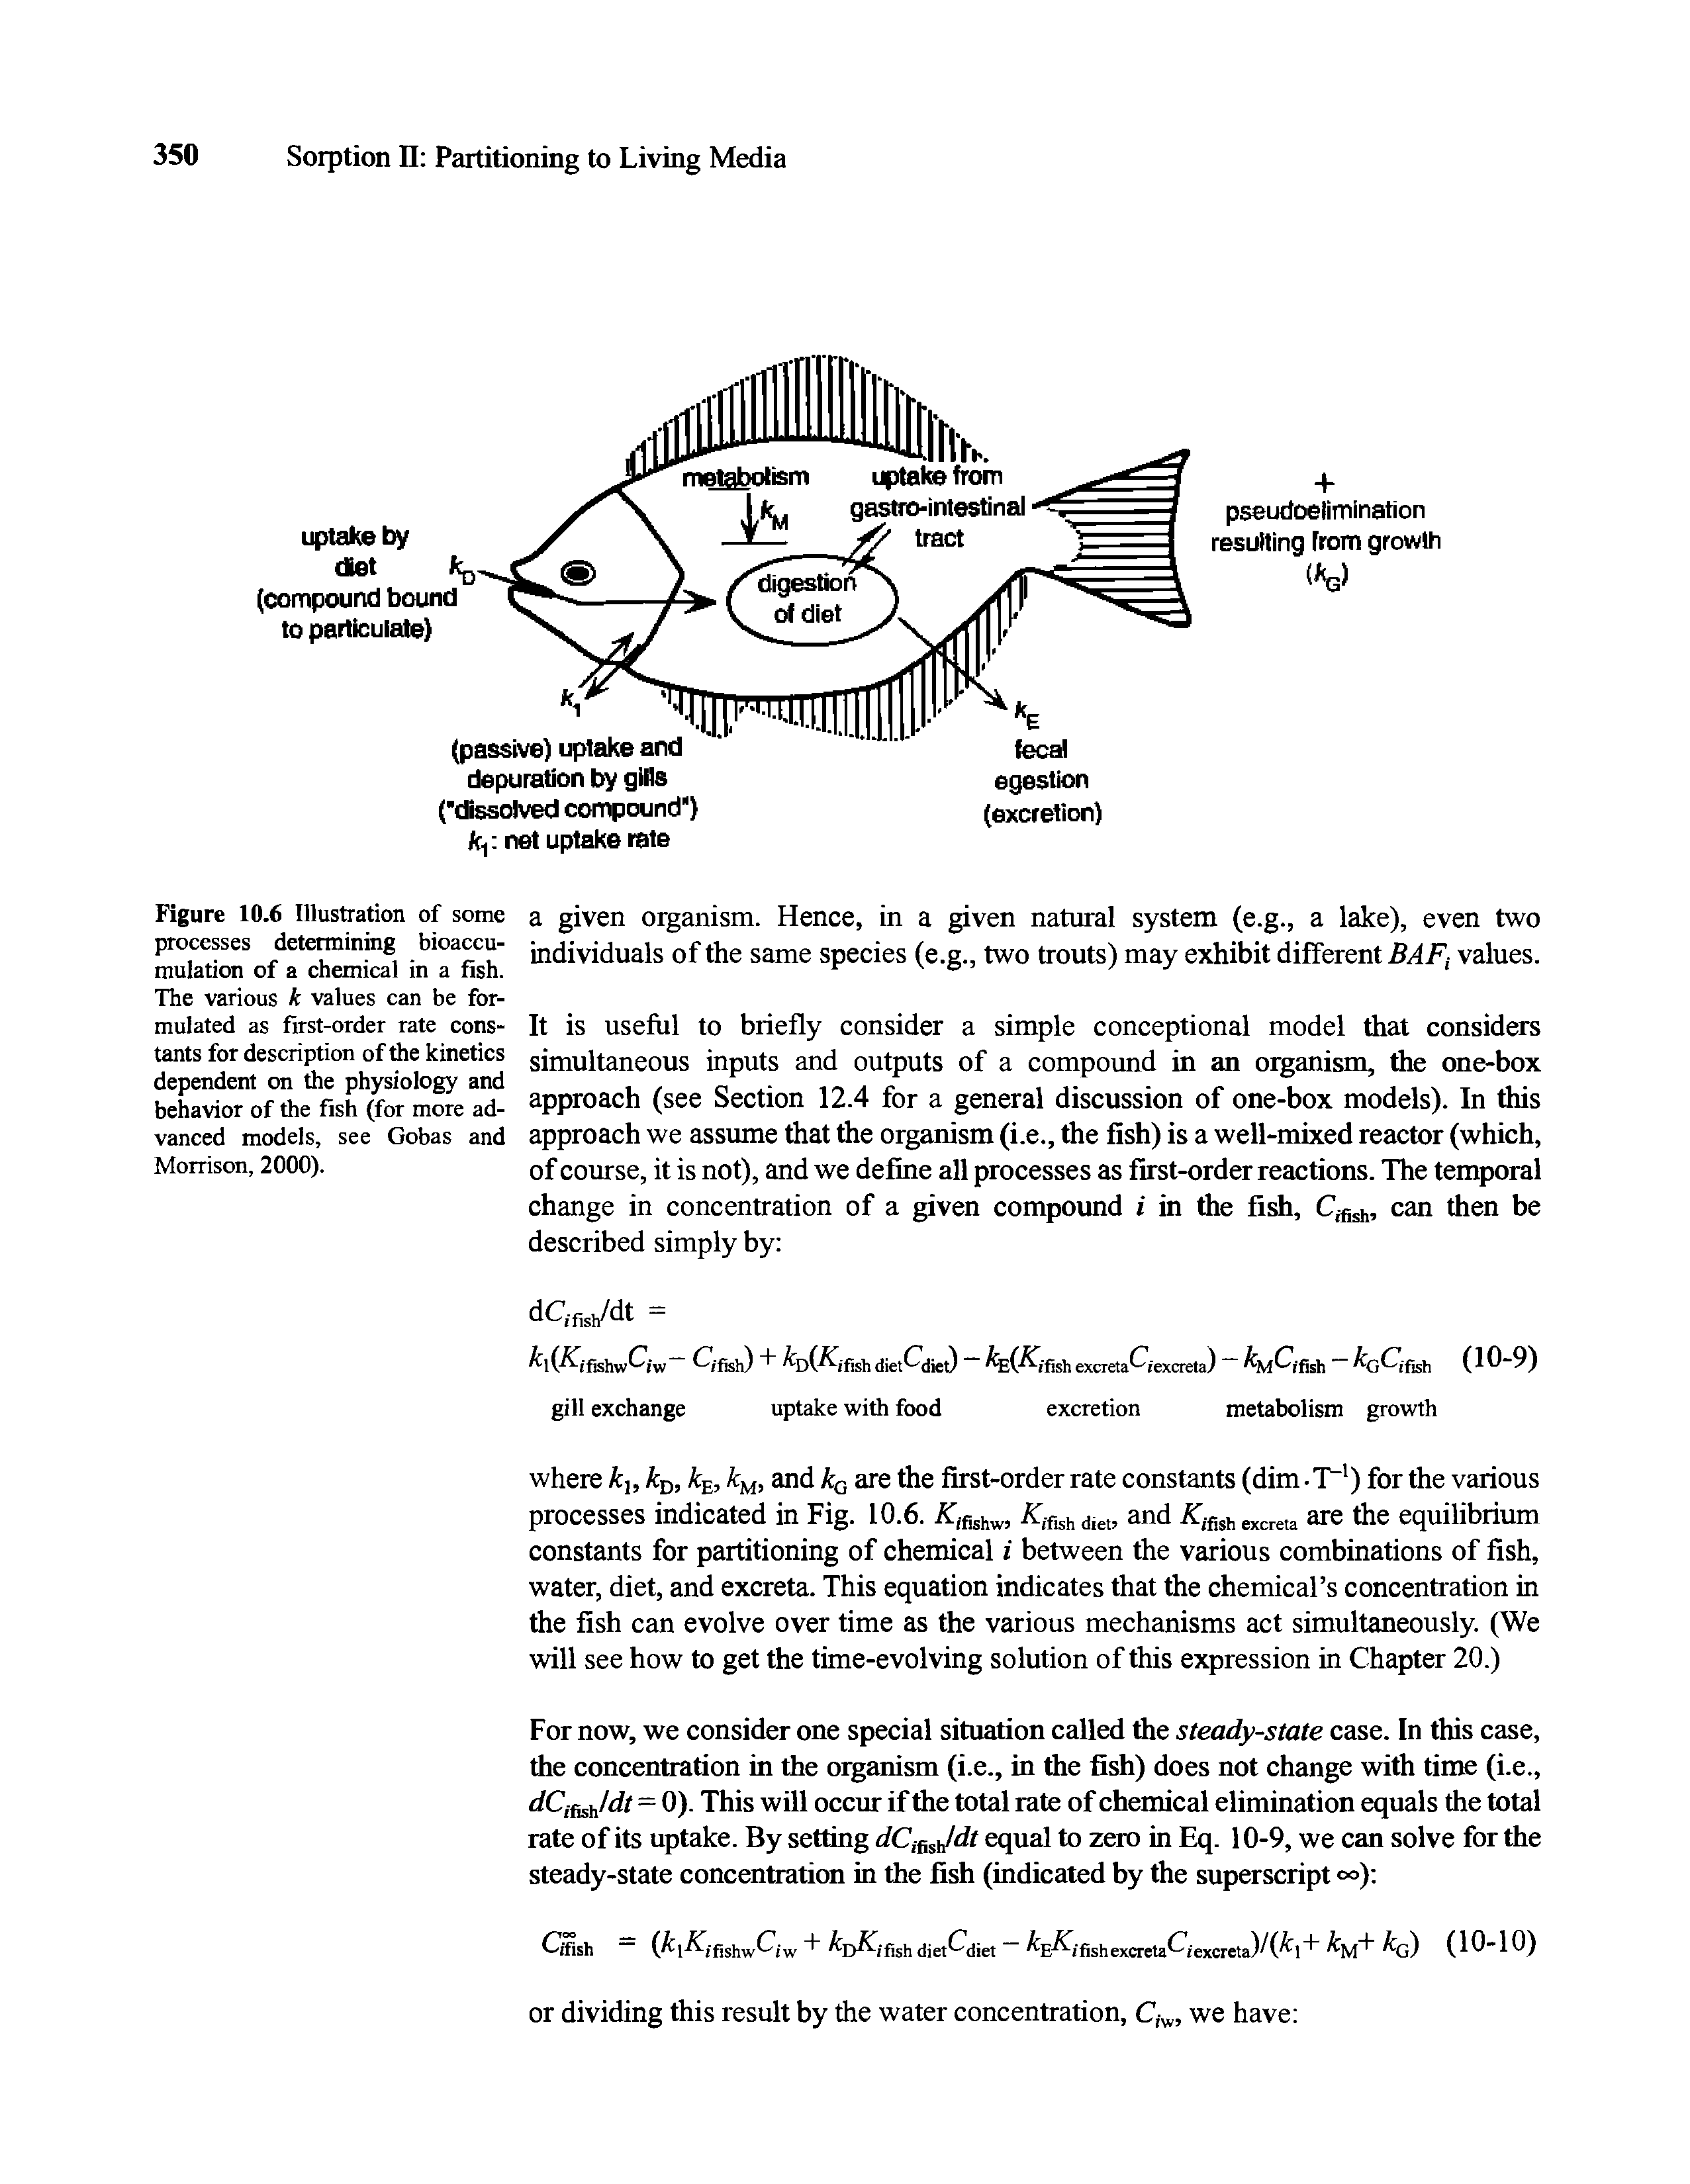 Figure 10.6 Illustration of some processes determining bioaccumulation of a chemical in a fish. The various k values can be formulated as first-order rate constants for description of the kinetics dependent on the physiology and behavior of the fish (for more advanced models, see Gobas and Morrison, 2000).